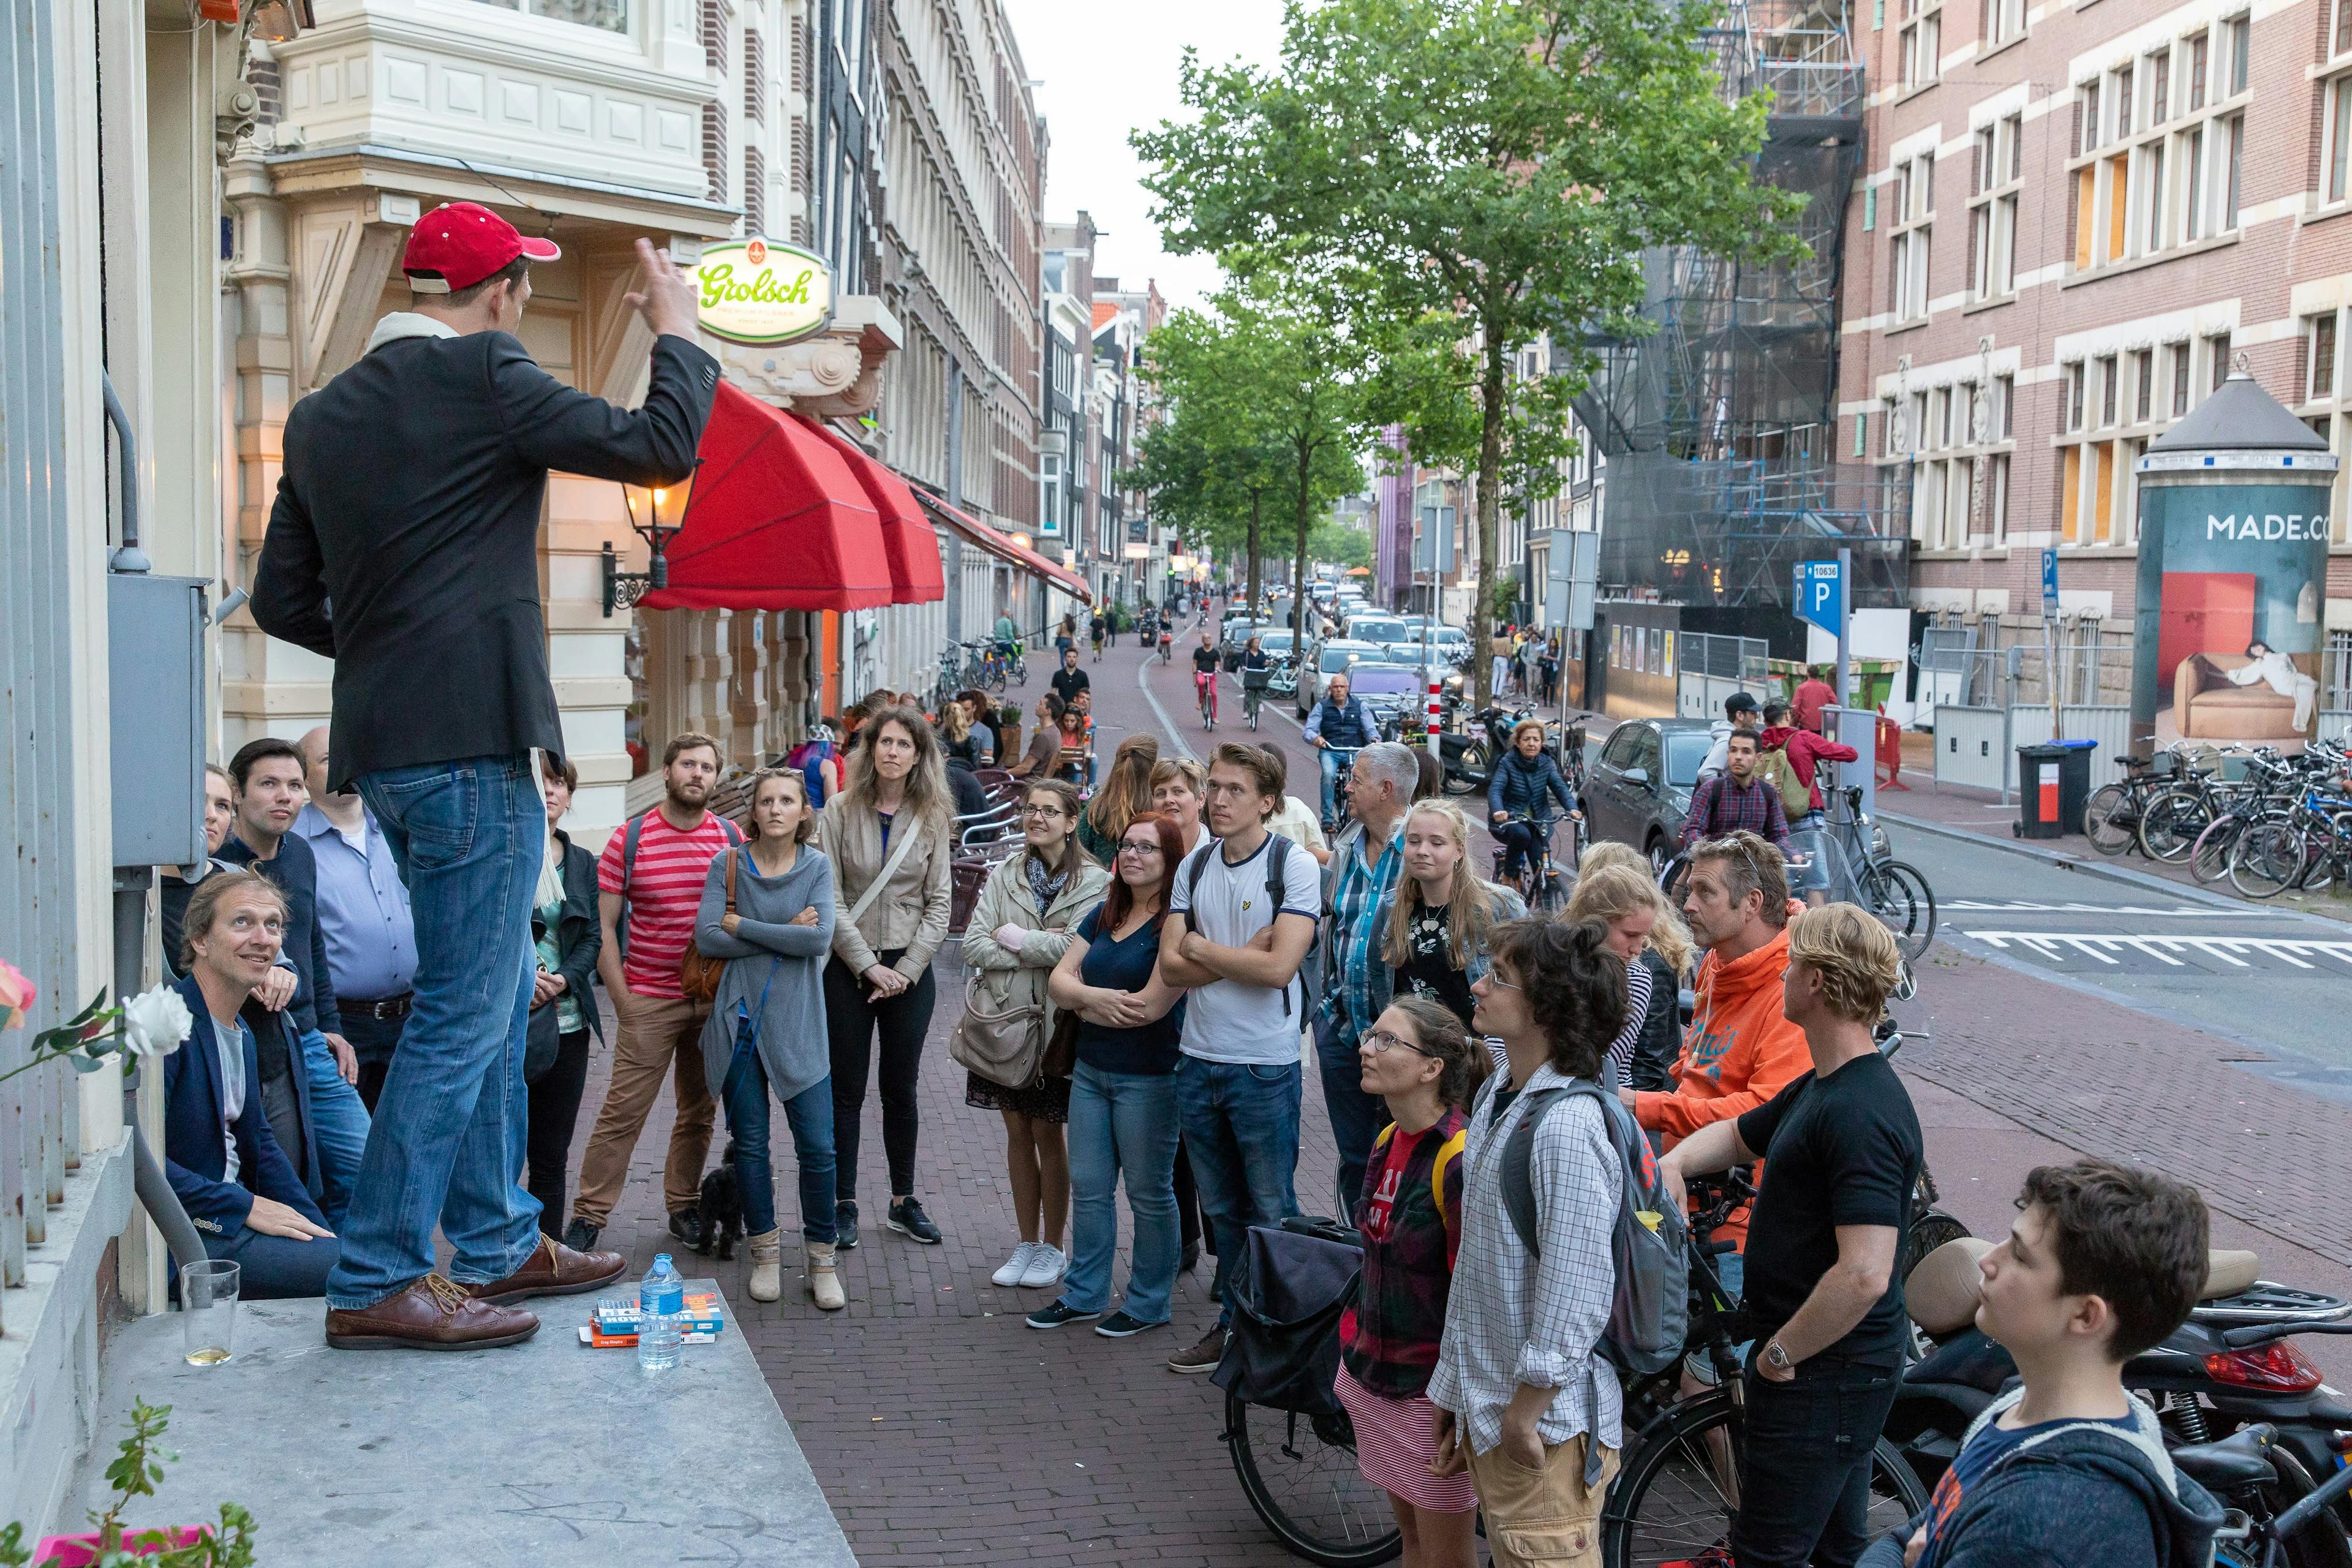 Comedian with his audience during a Comedy Walk